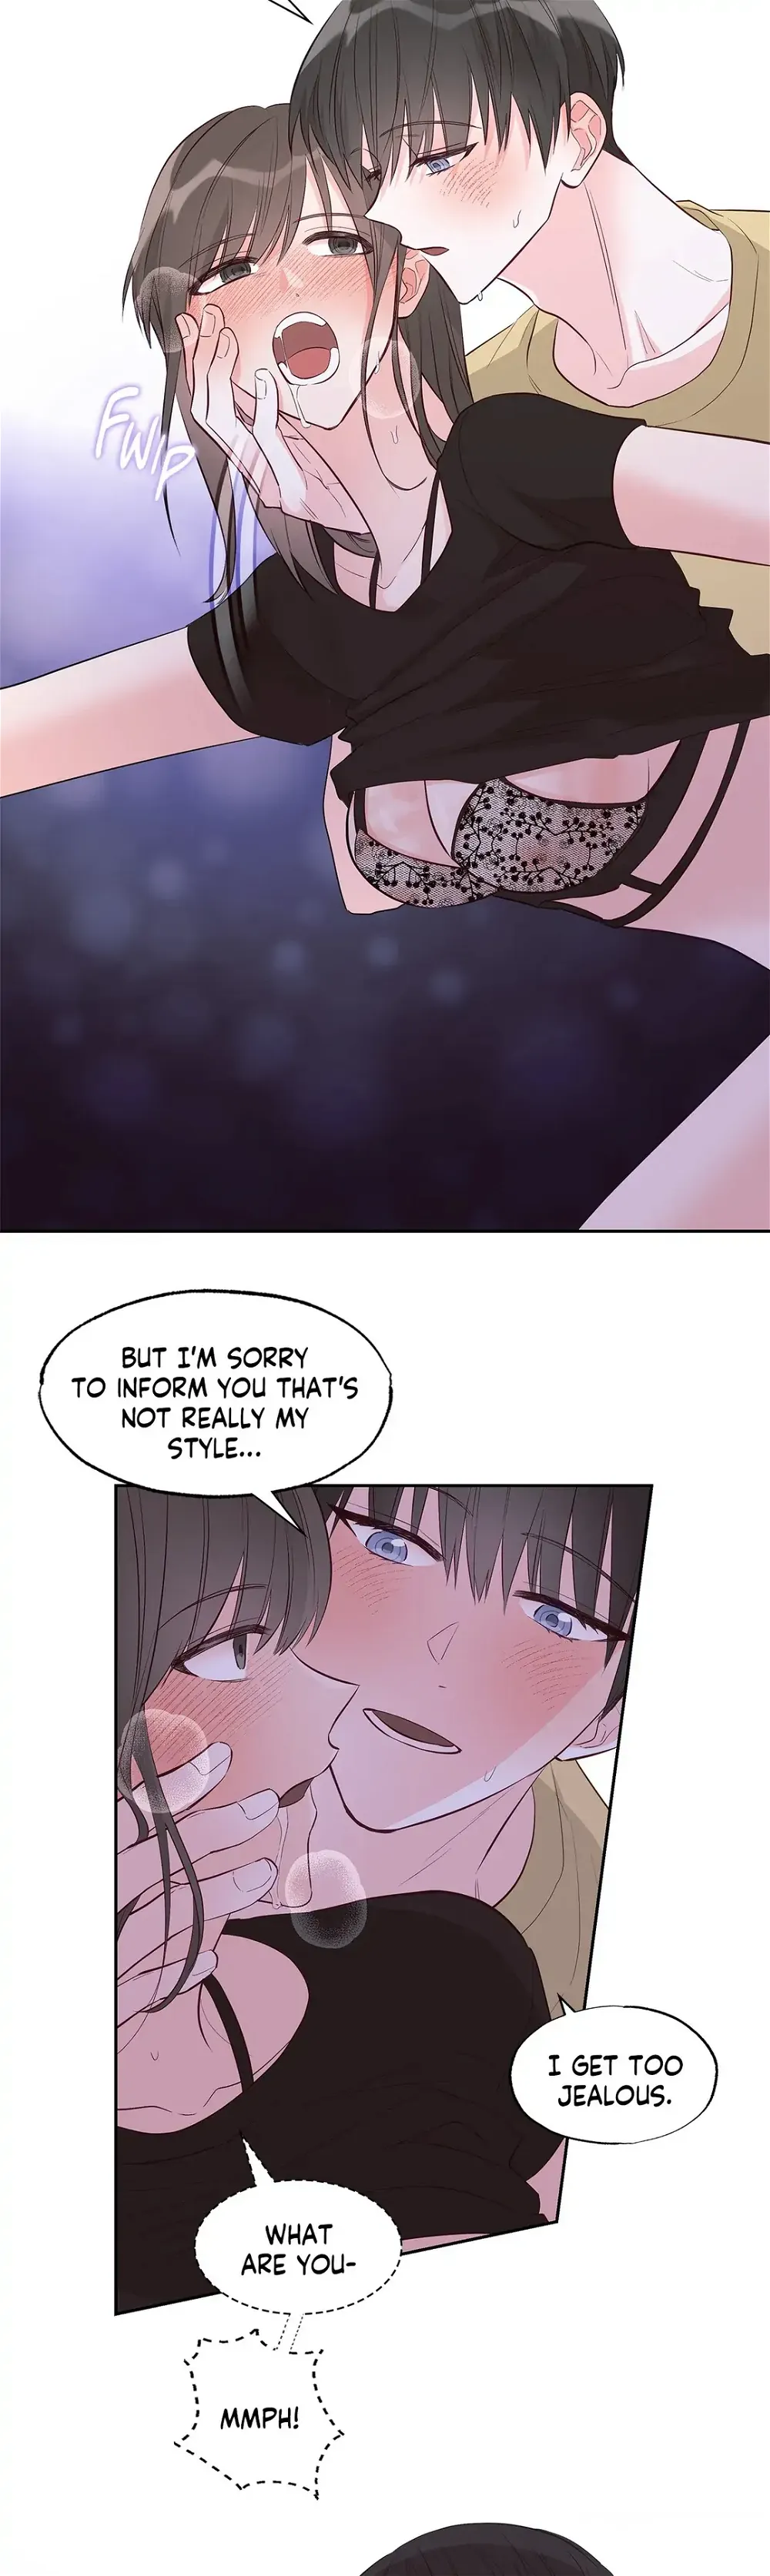 Learning to Love You chapter 30 - Page 14